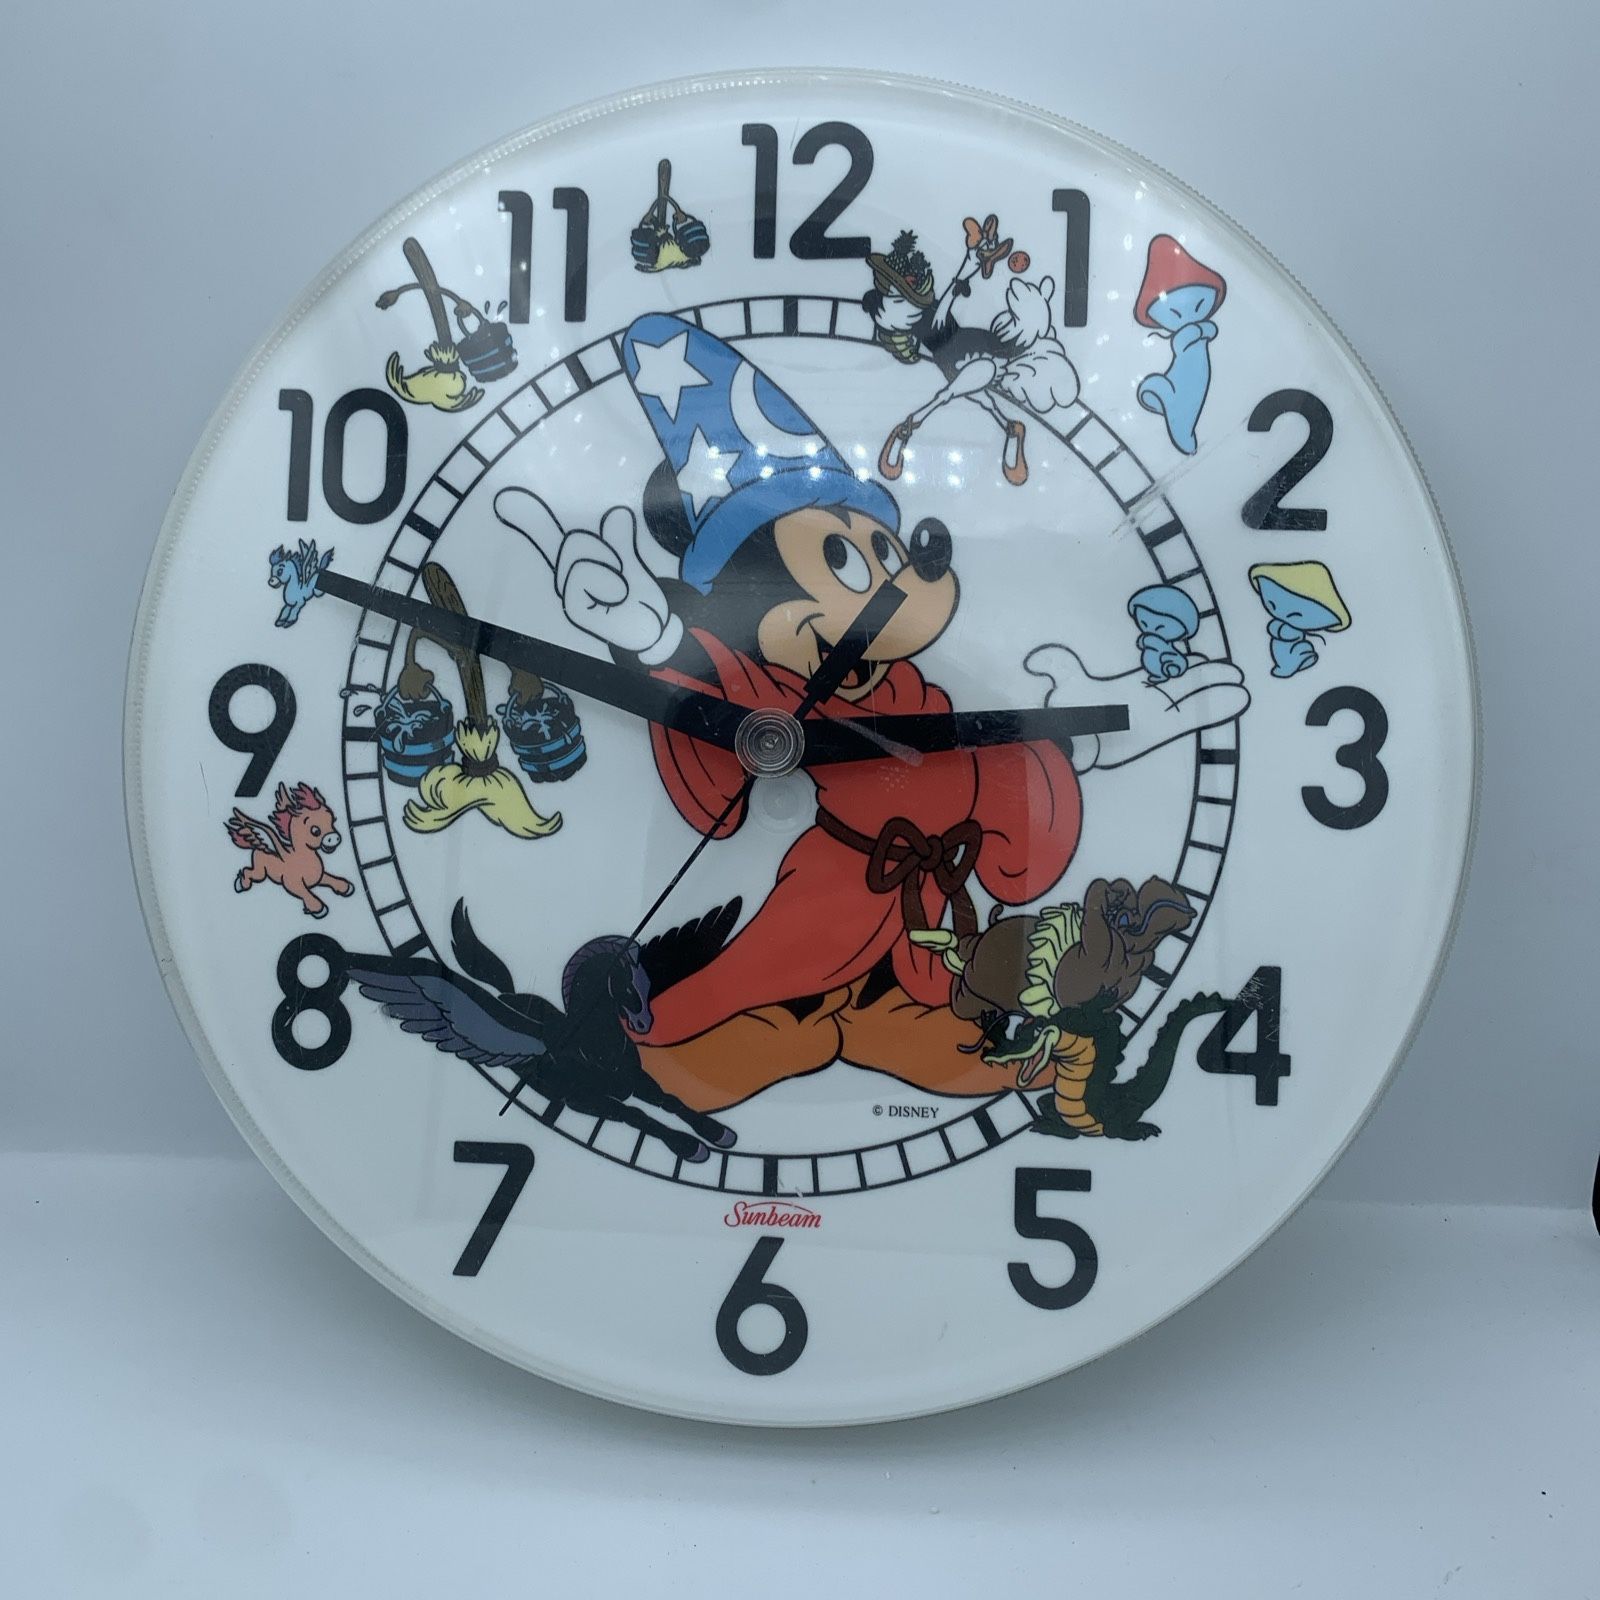 Vintage Walt Disney Fantasia Cartoon Mickey Mouse 12" WALL Clock TESTED WORKS $35 Cash or E-pay RI Daily Deals Message for appt. https://www.facebook.